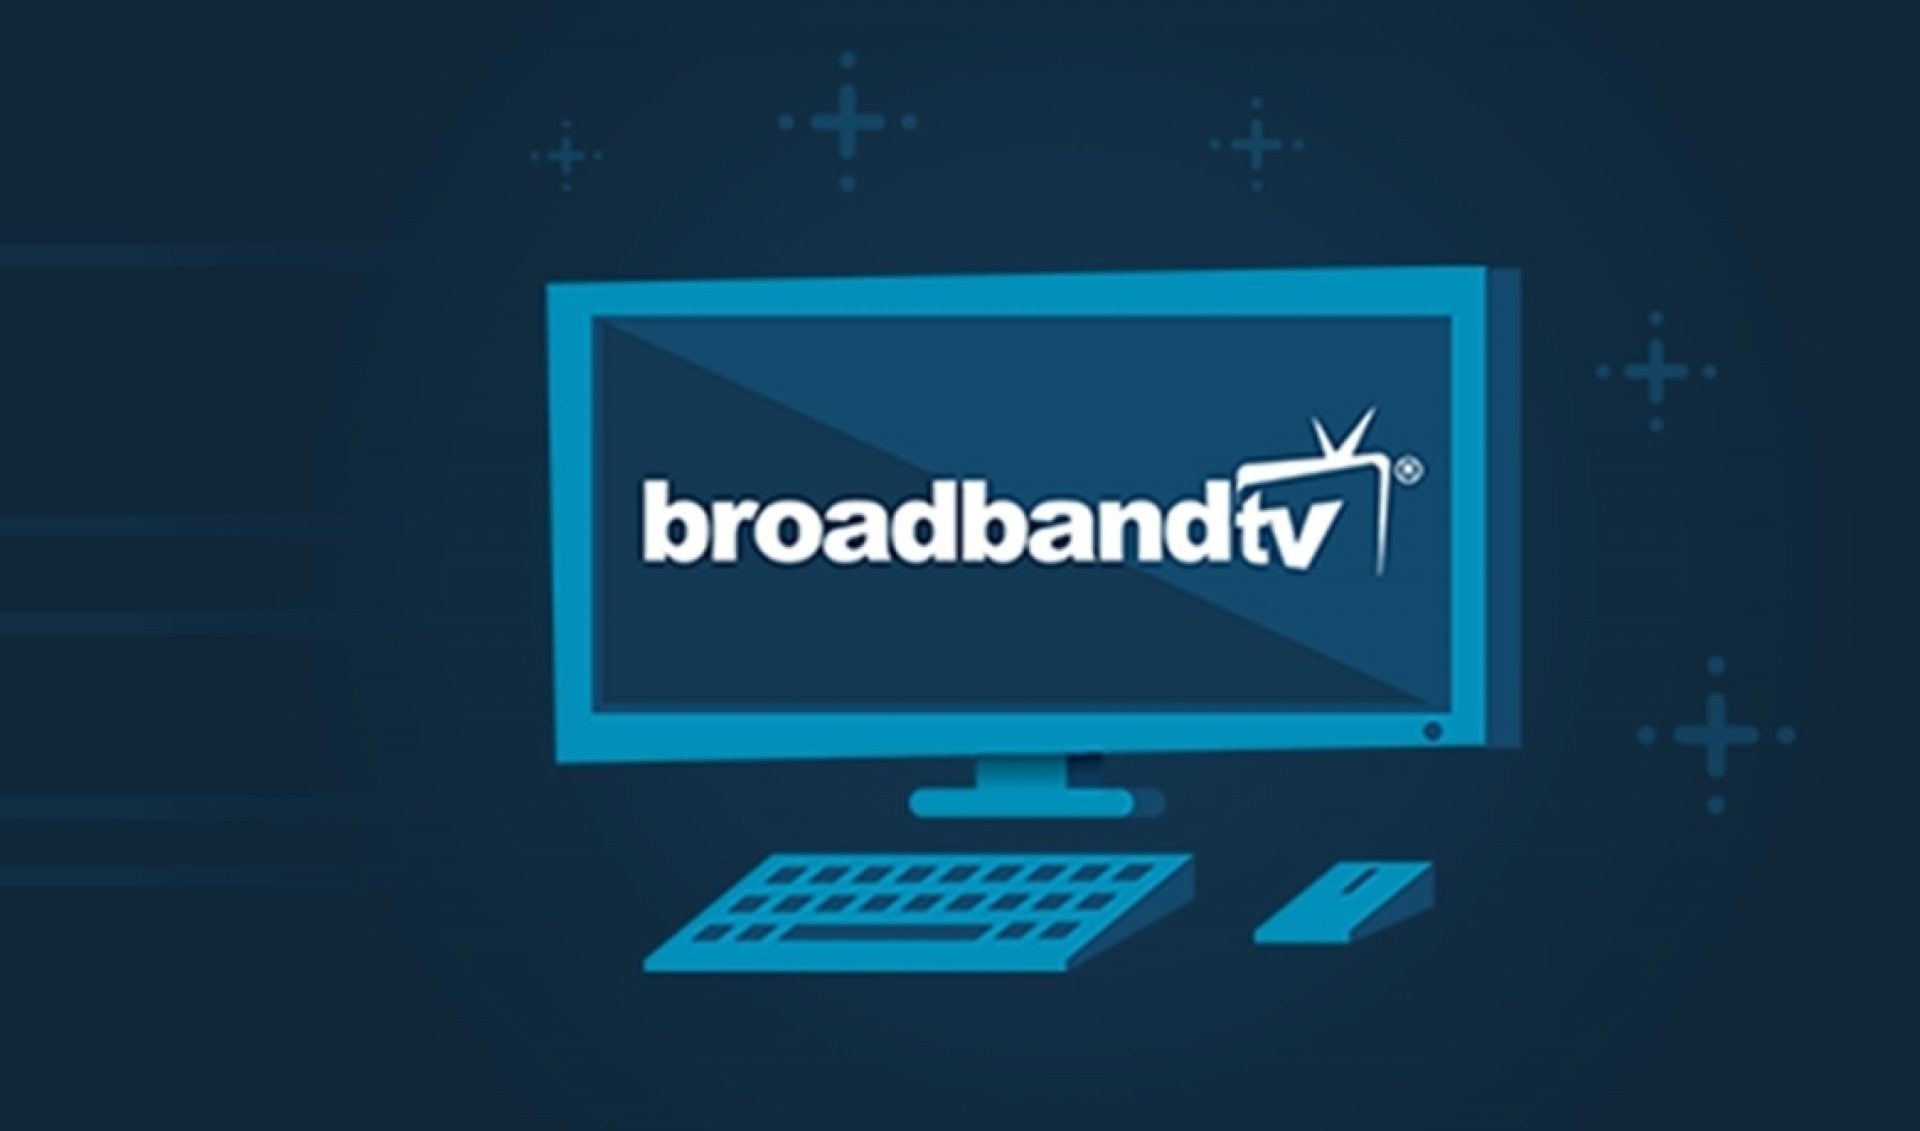 With 318 Million Monthly Viewers, BroadbandTV Tops Comscore’s Network Rankings